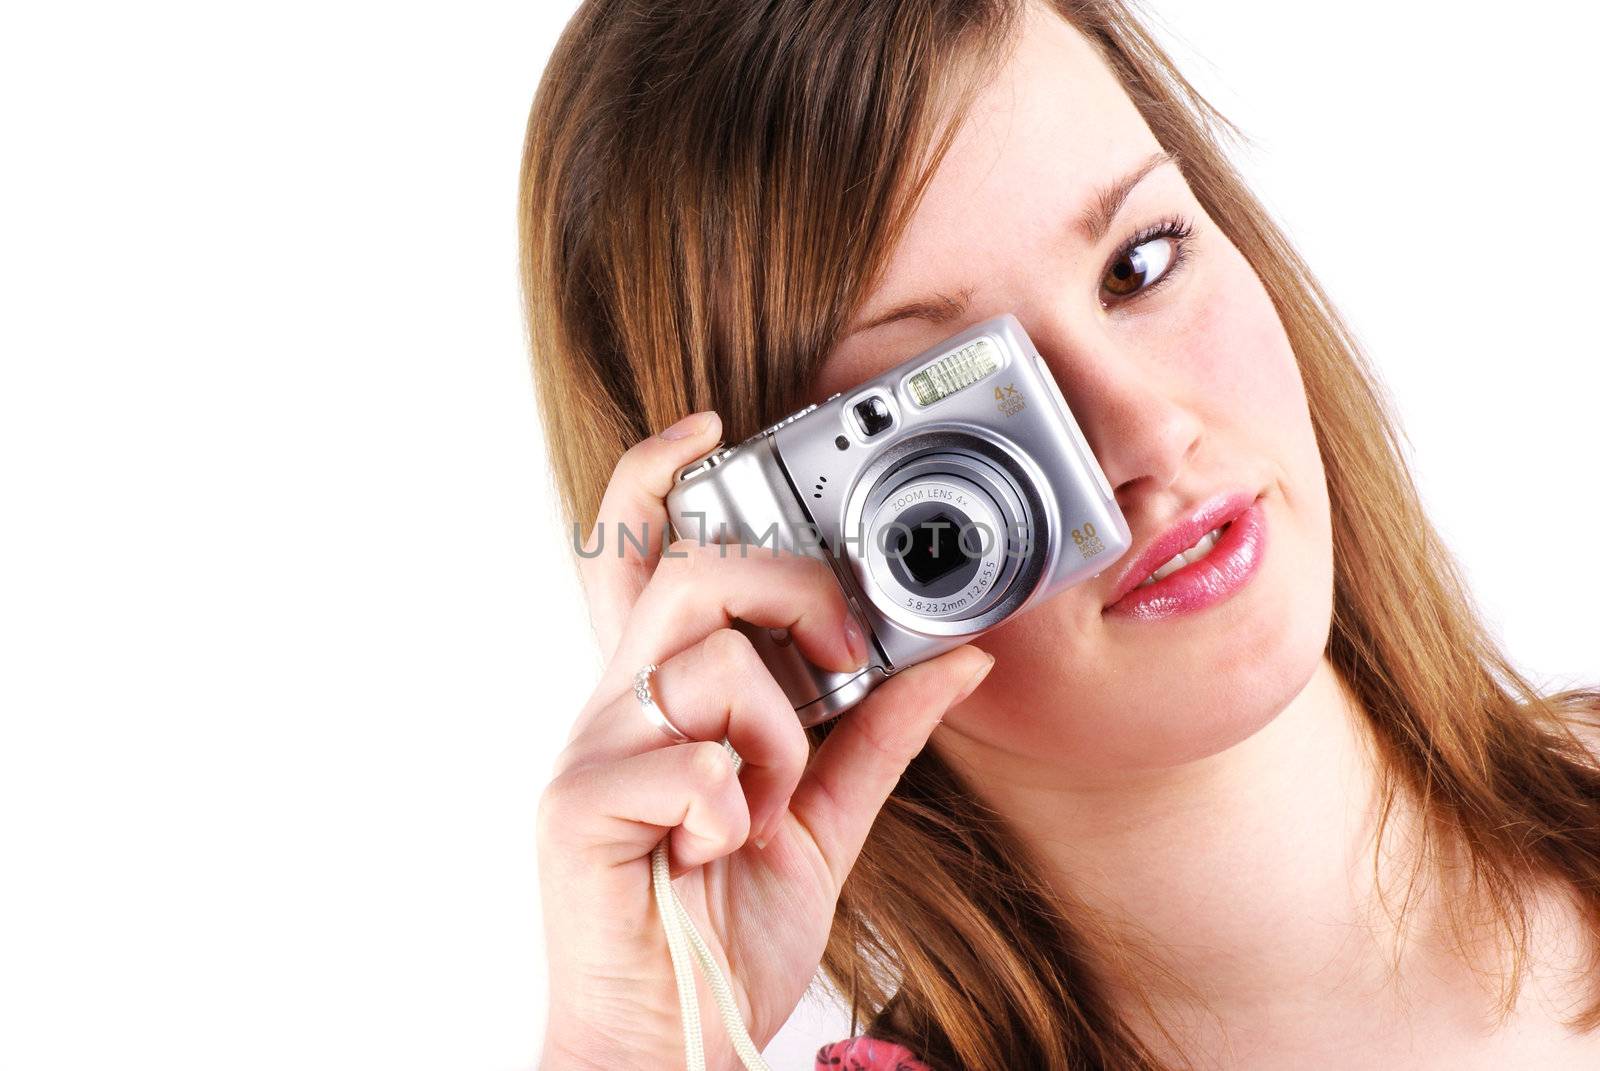 Teen girl with compact camera isolated on white with copy space.